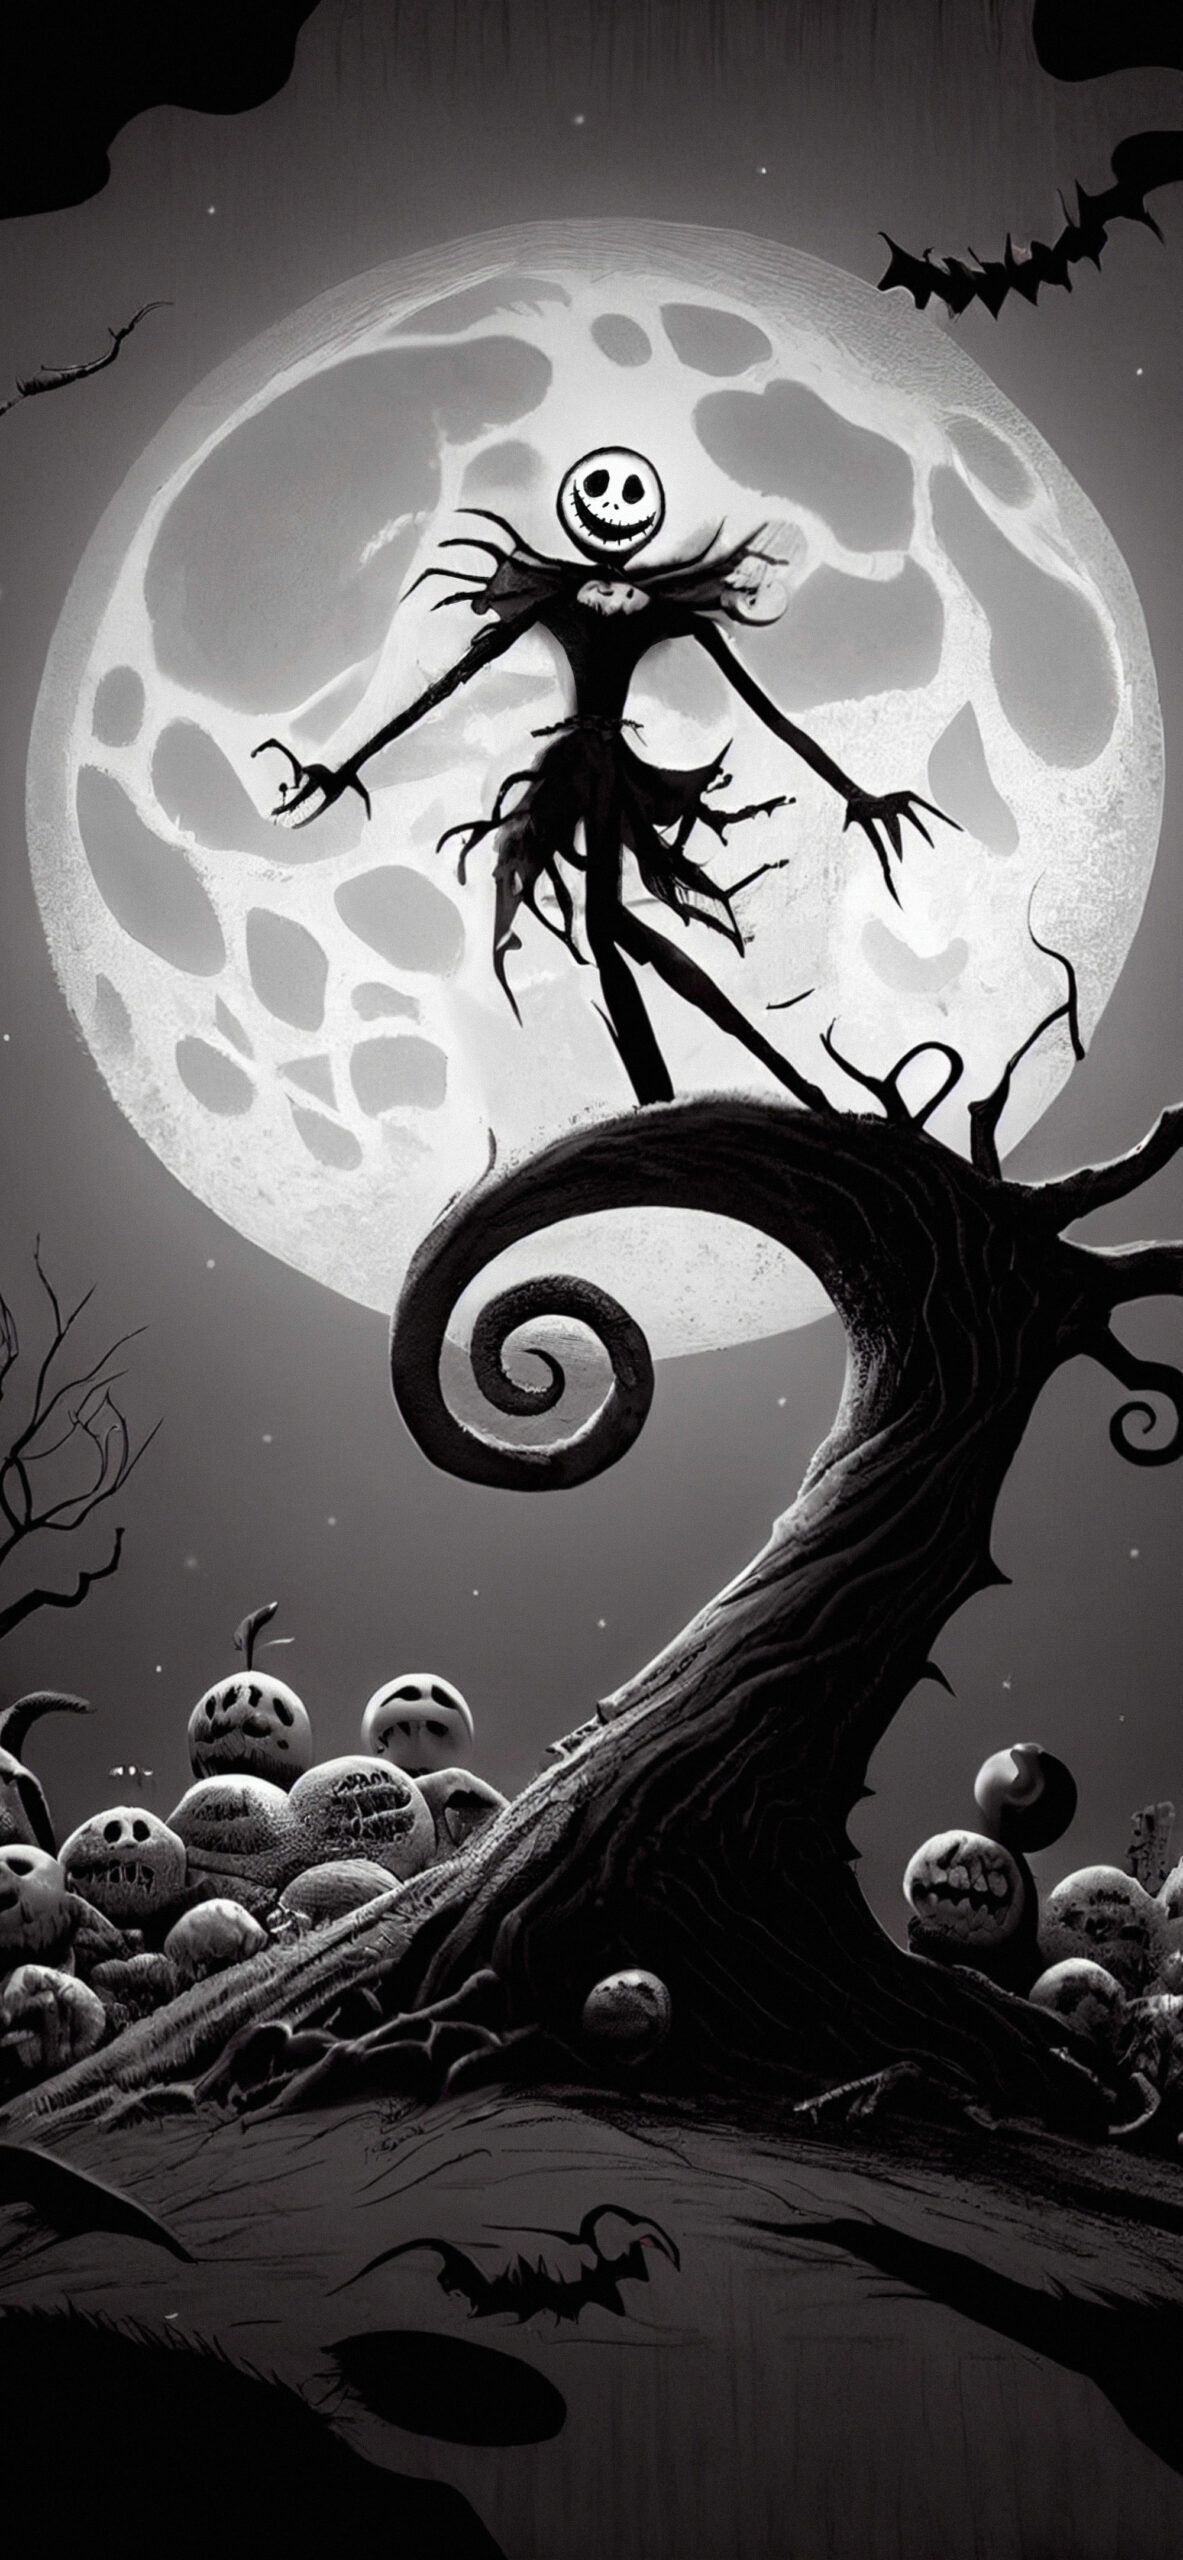 The nightmare before christmas, iPhone wallpaper - White Christmas